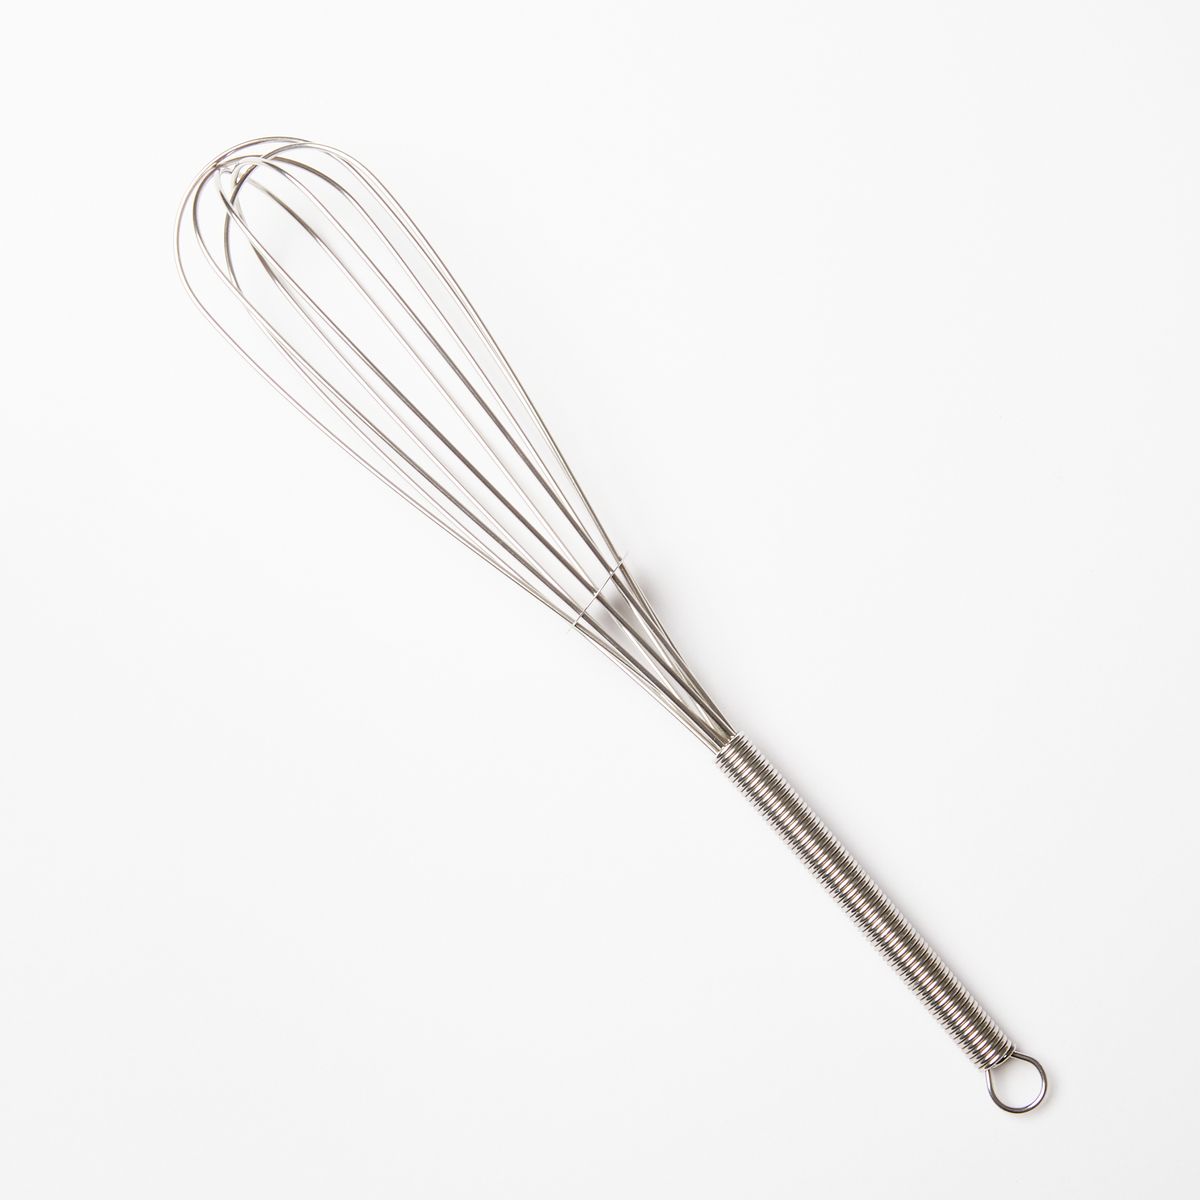 Tiny slim stainless steel whisk with a little circle hook on the end of the handle